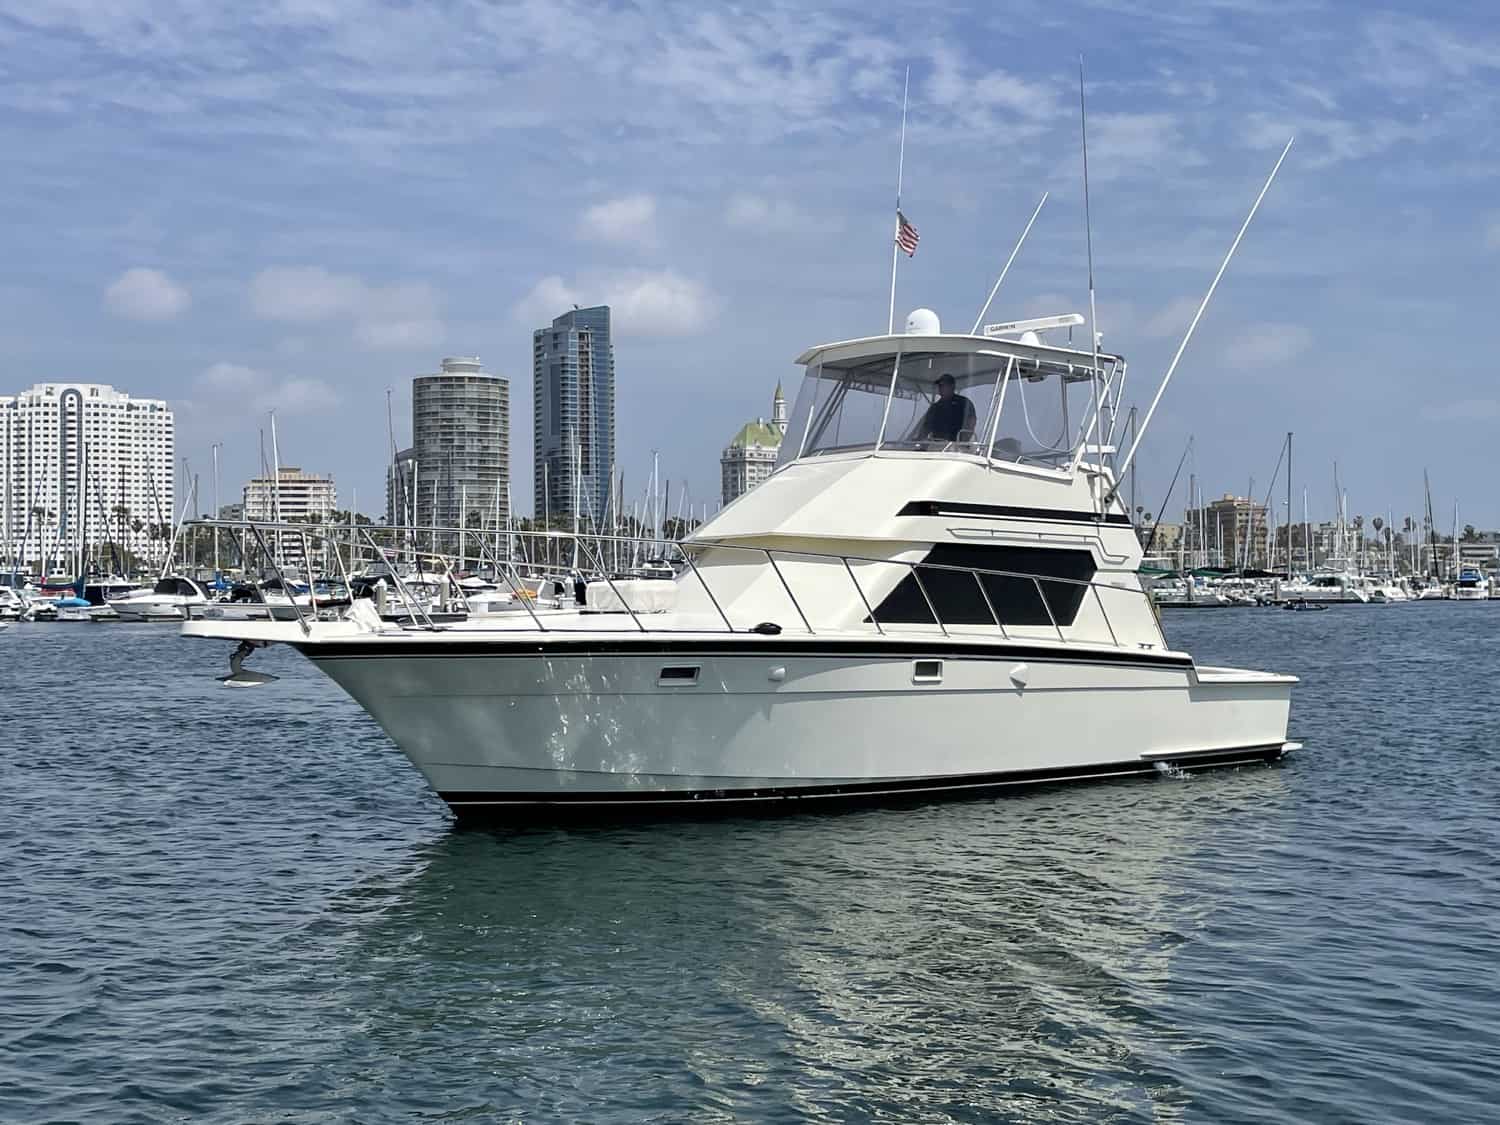 41 ft yacht for sale